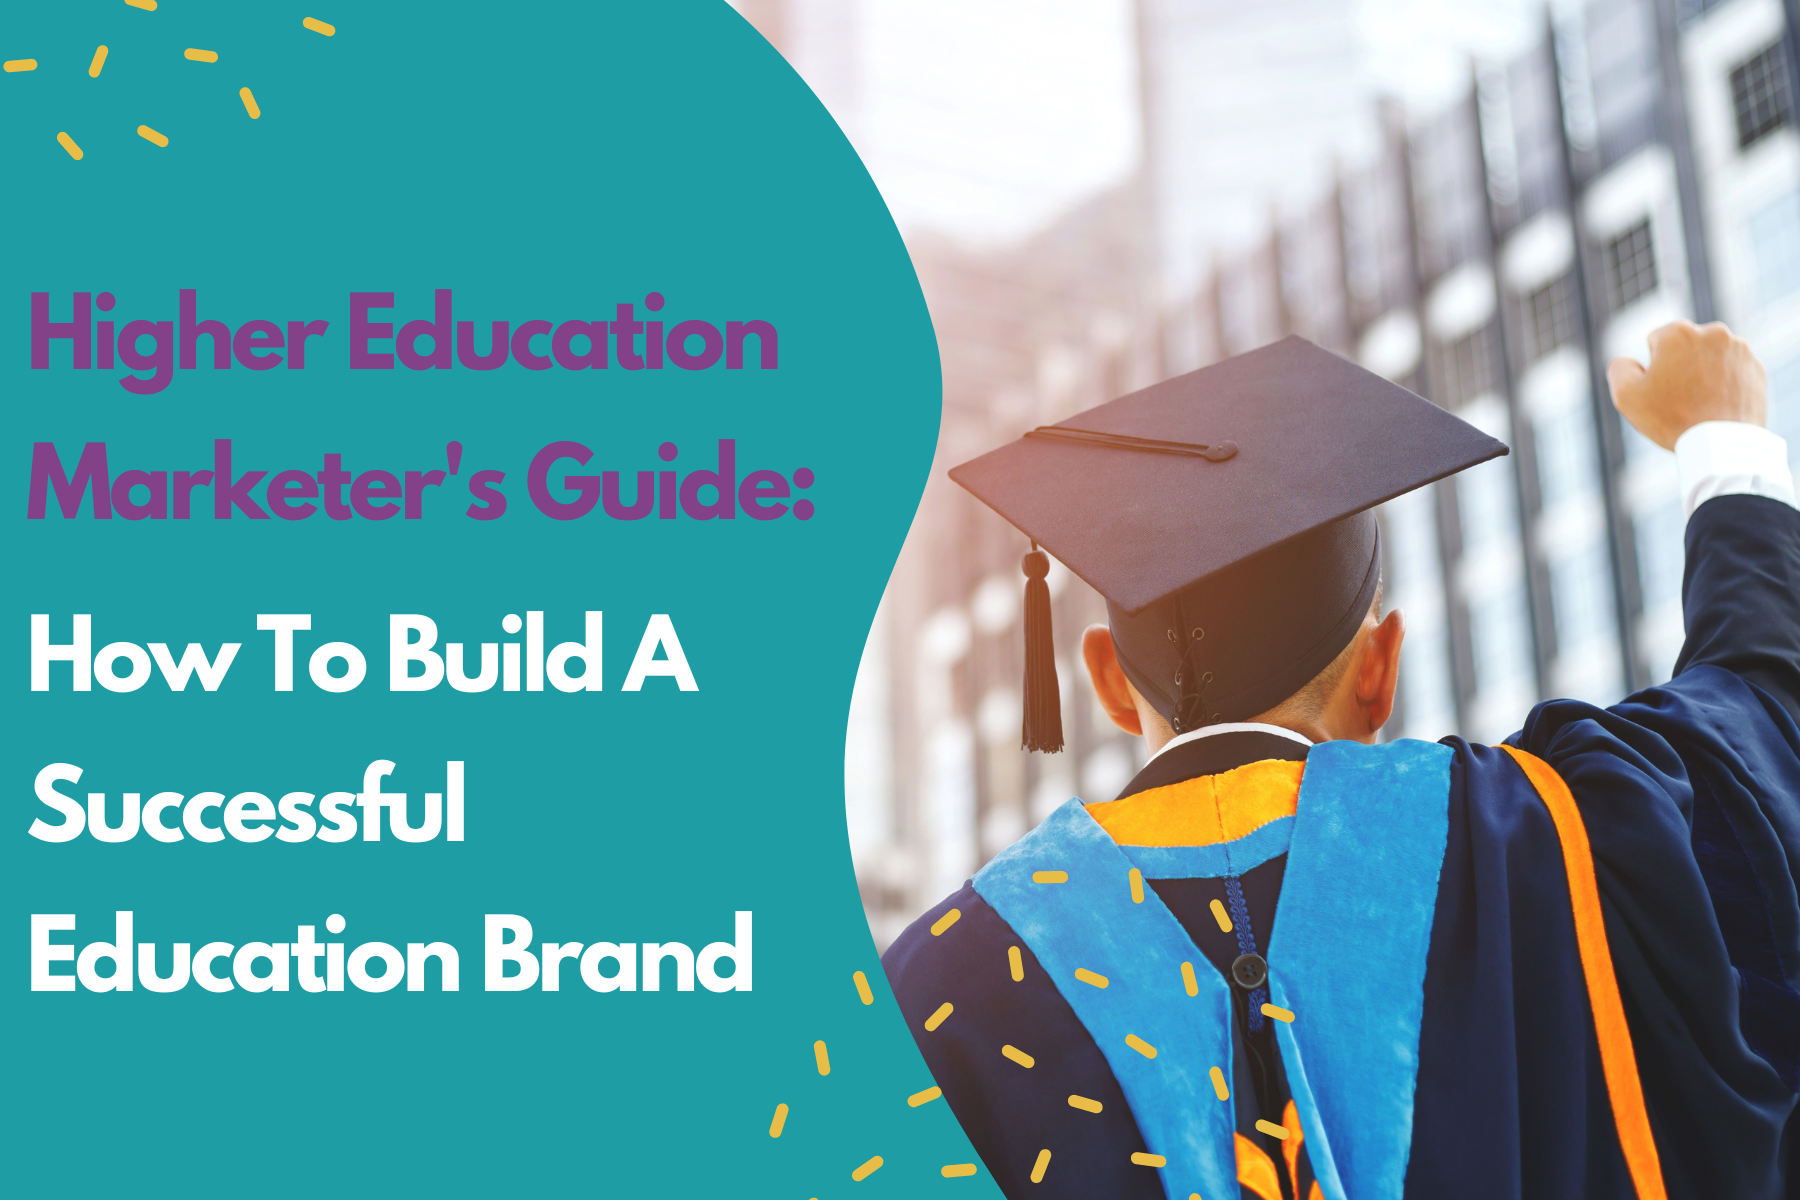 Higher Education Marketer's Guide: How To Build A Successful Education Brand